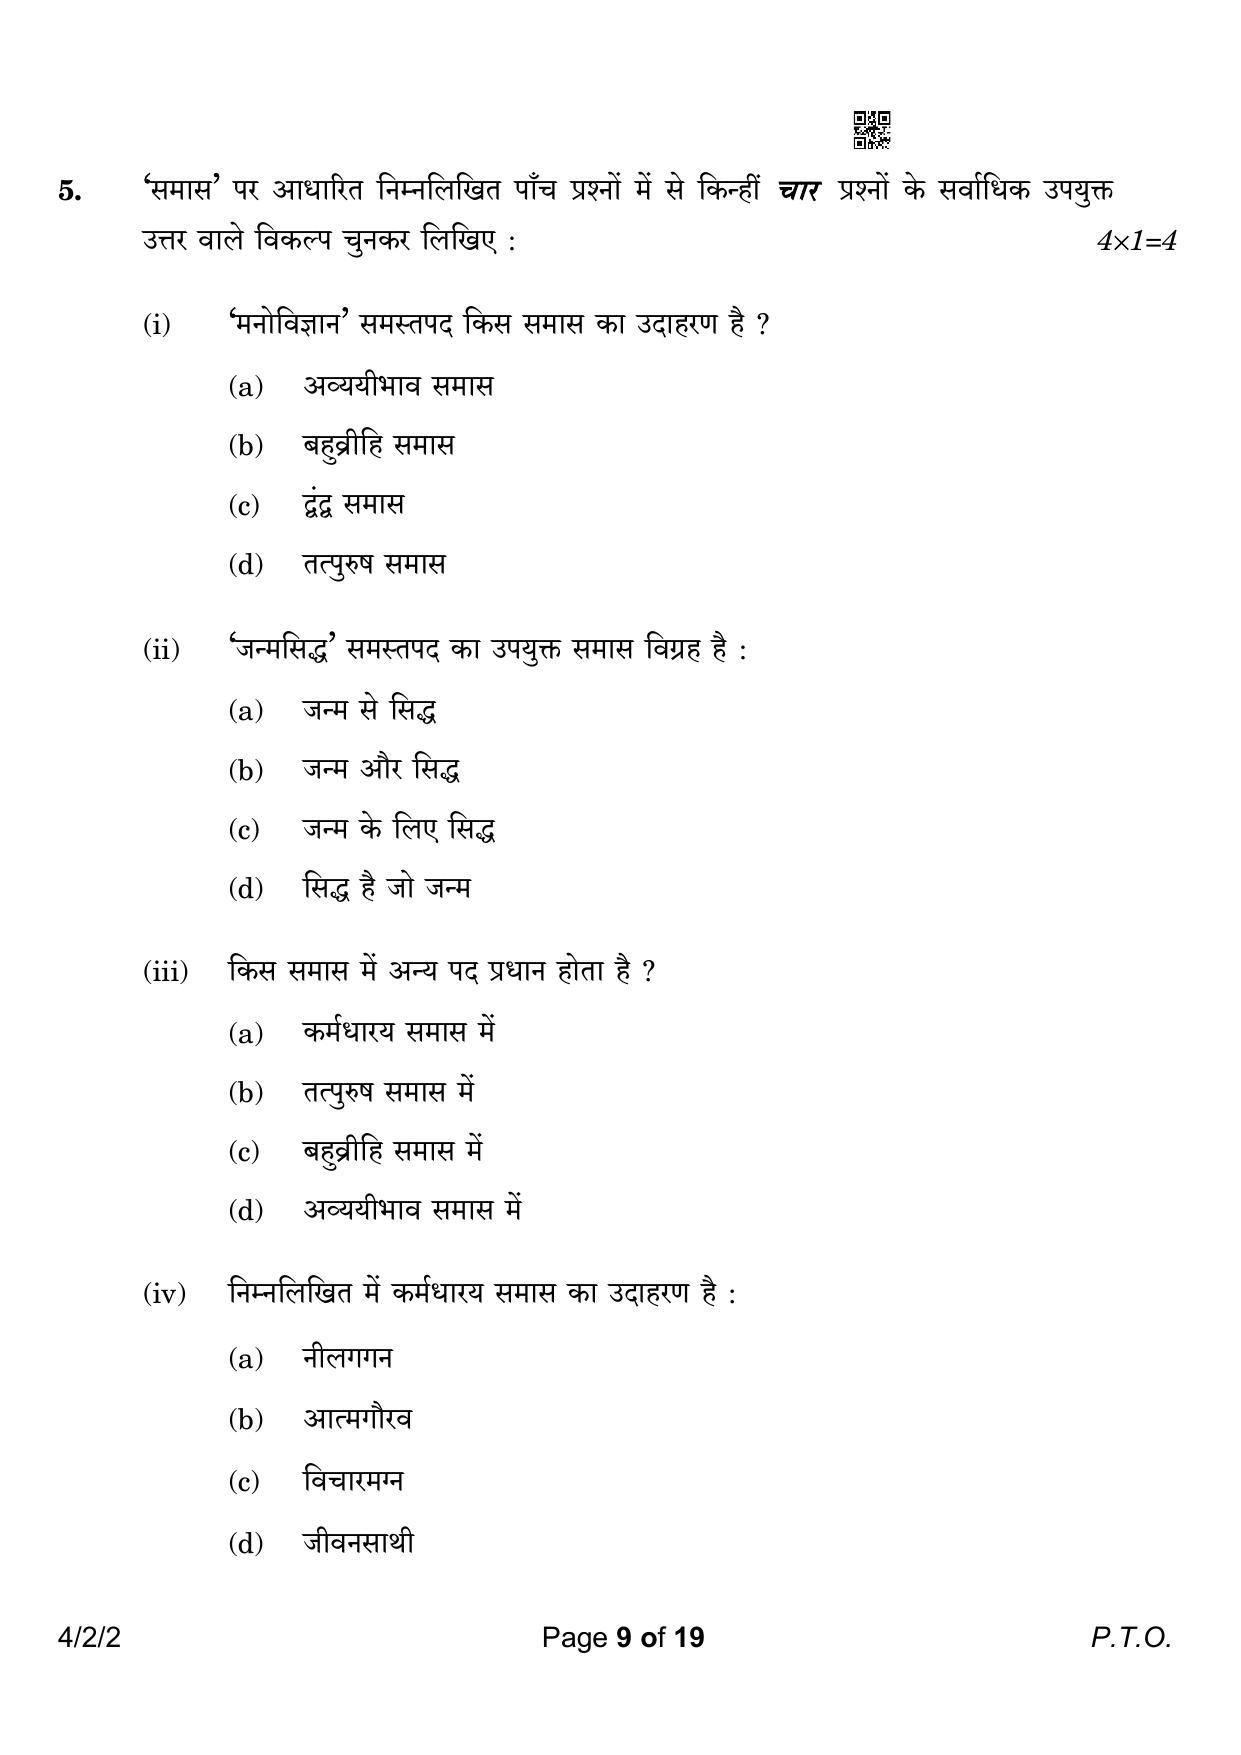 CBSE Class 10 4-2-2 Hindi B 2023 Question Paper - Page 9